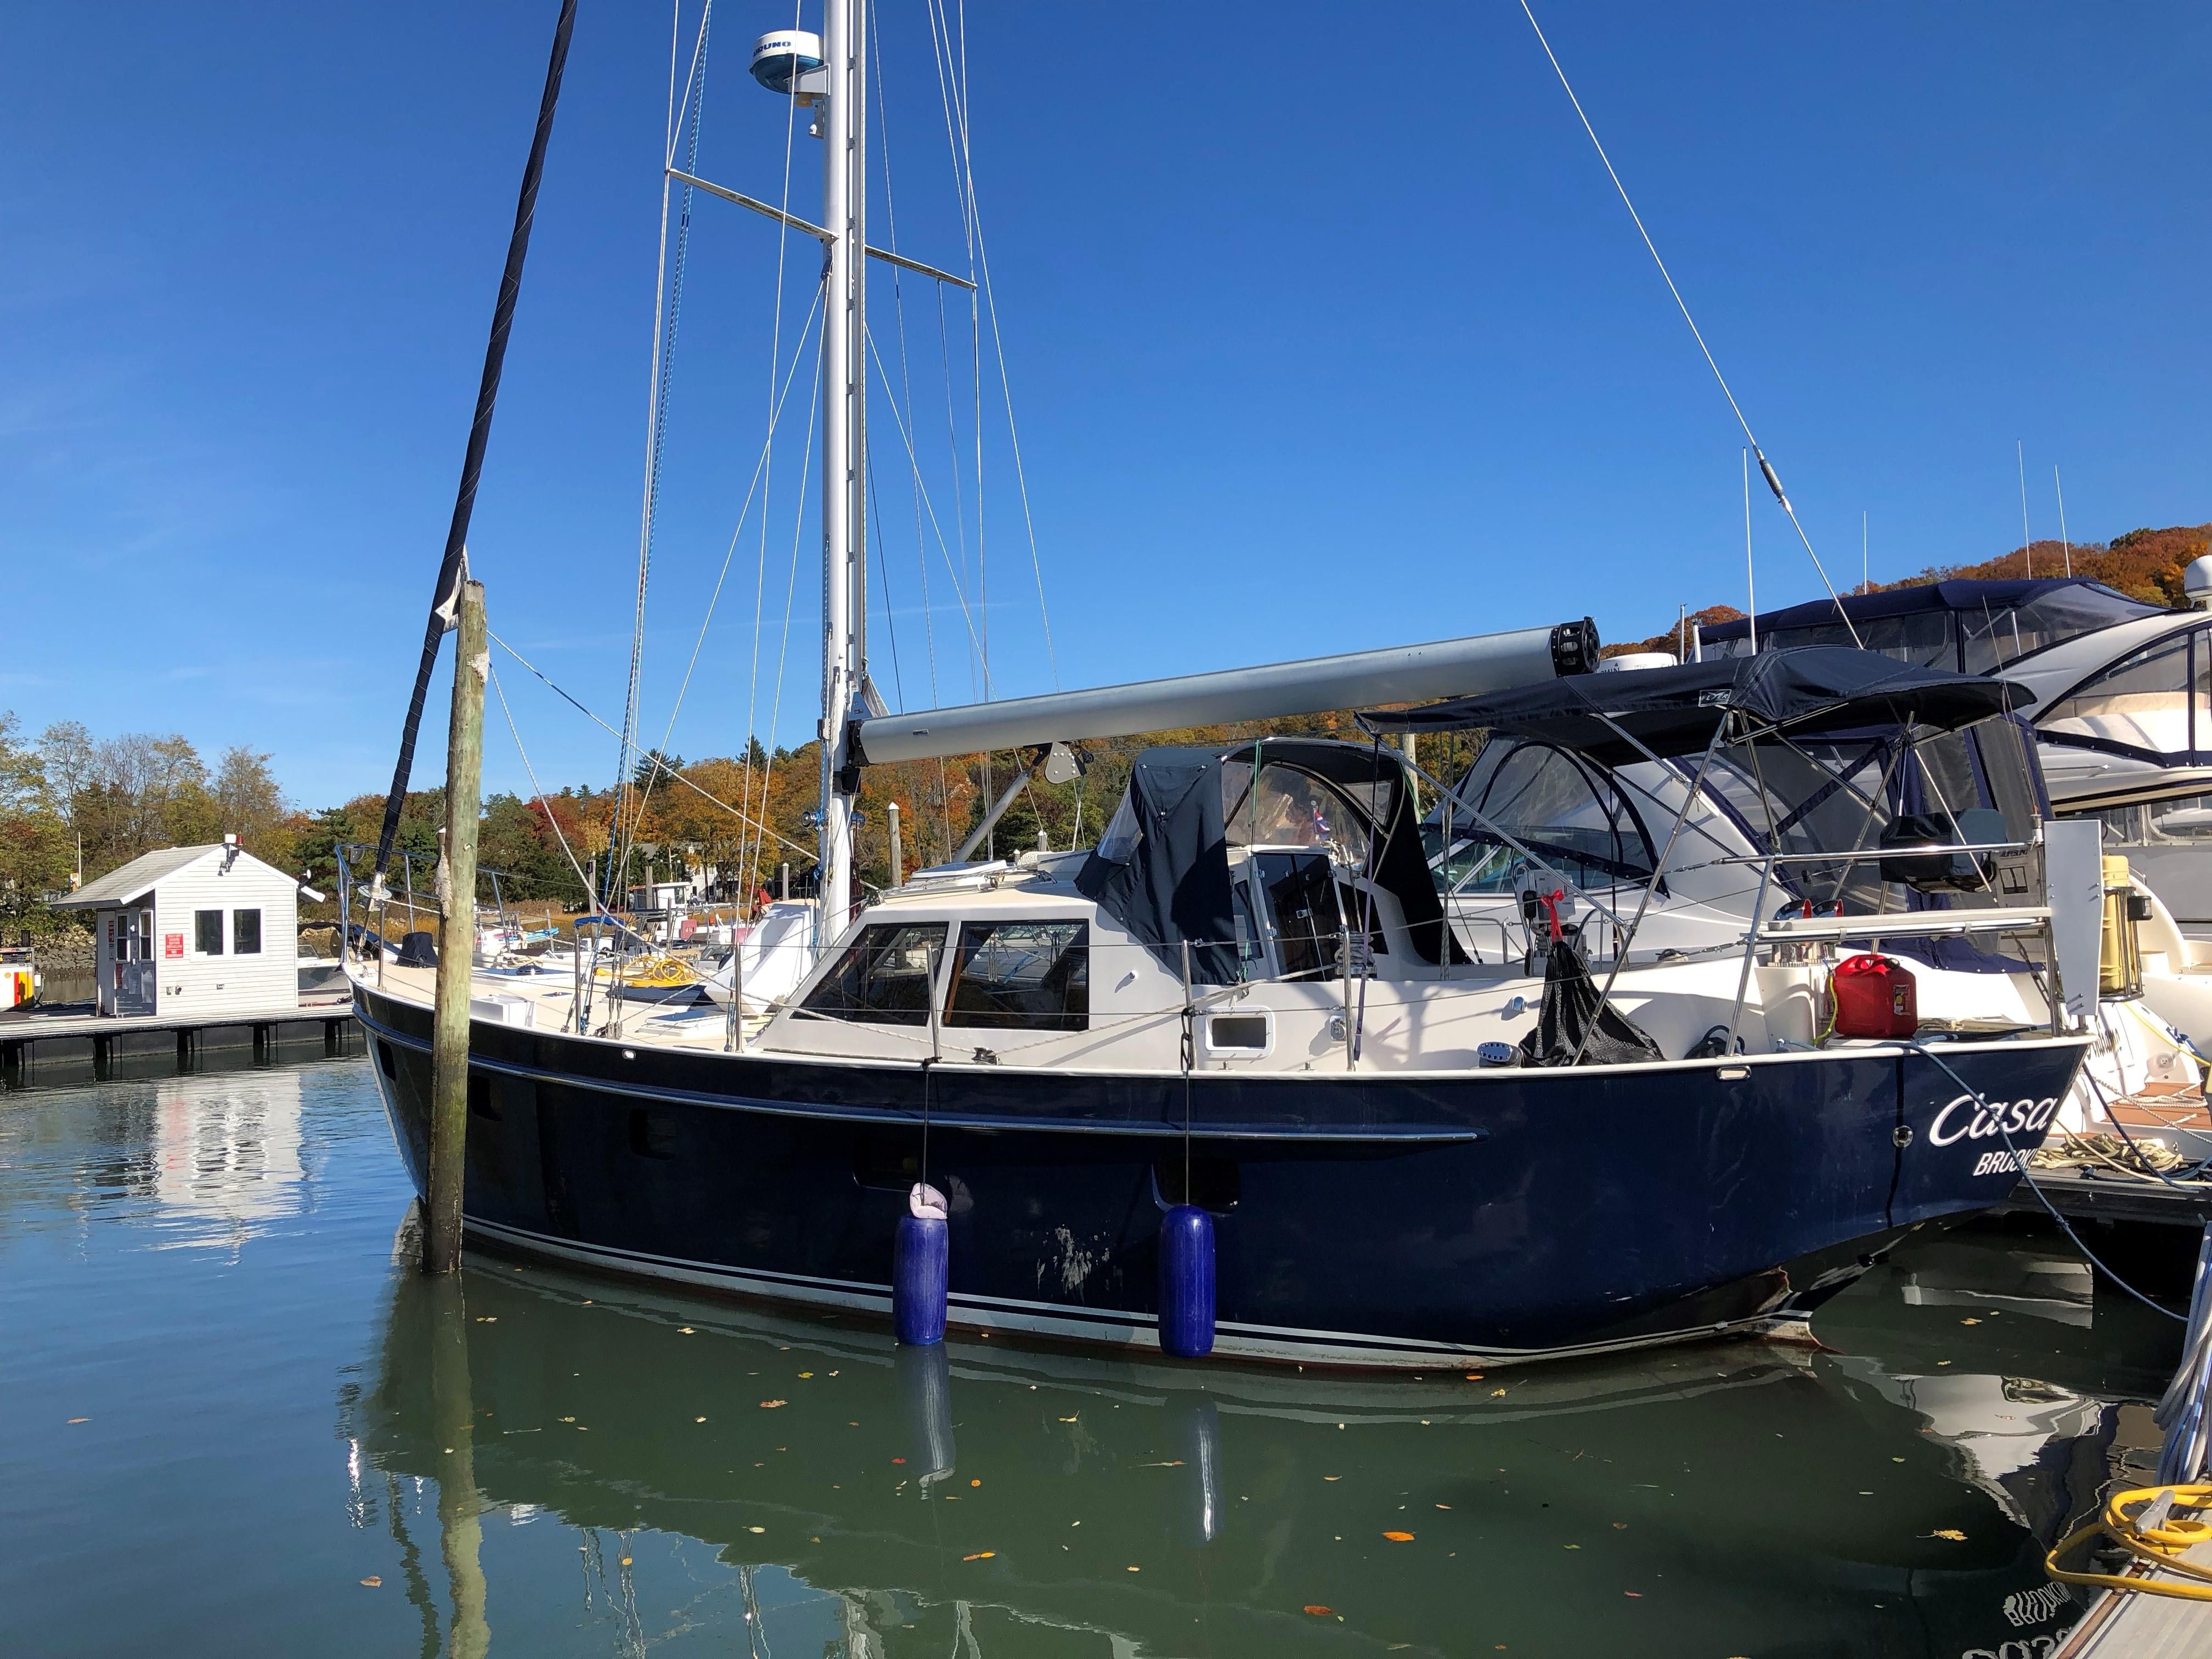 2004 benford pilot house sail boat for sale - www